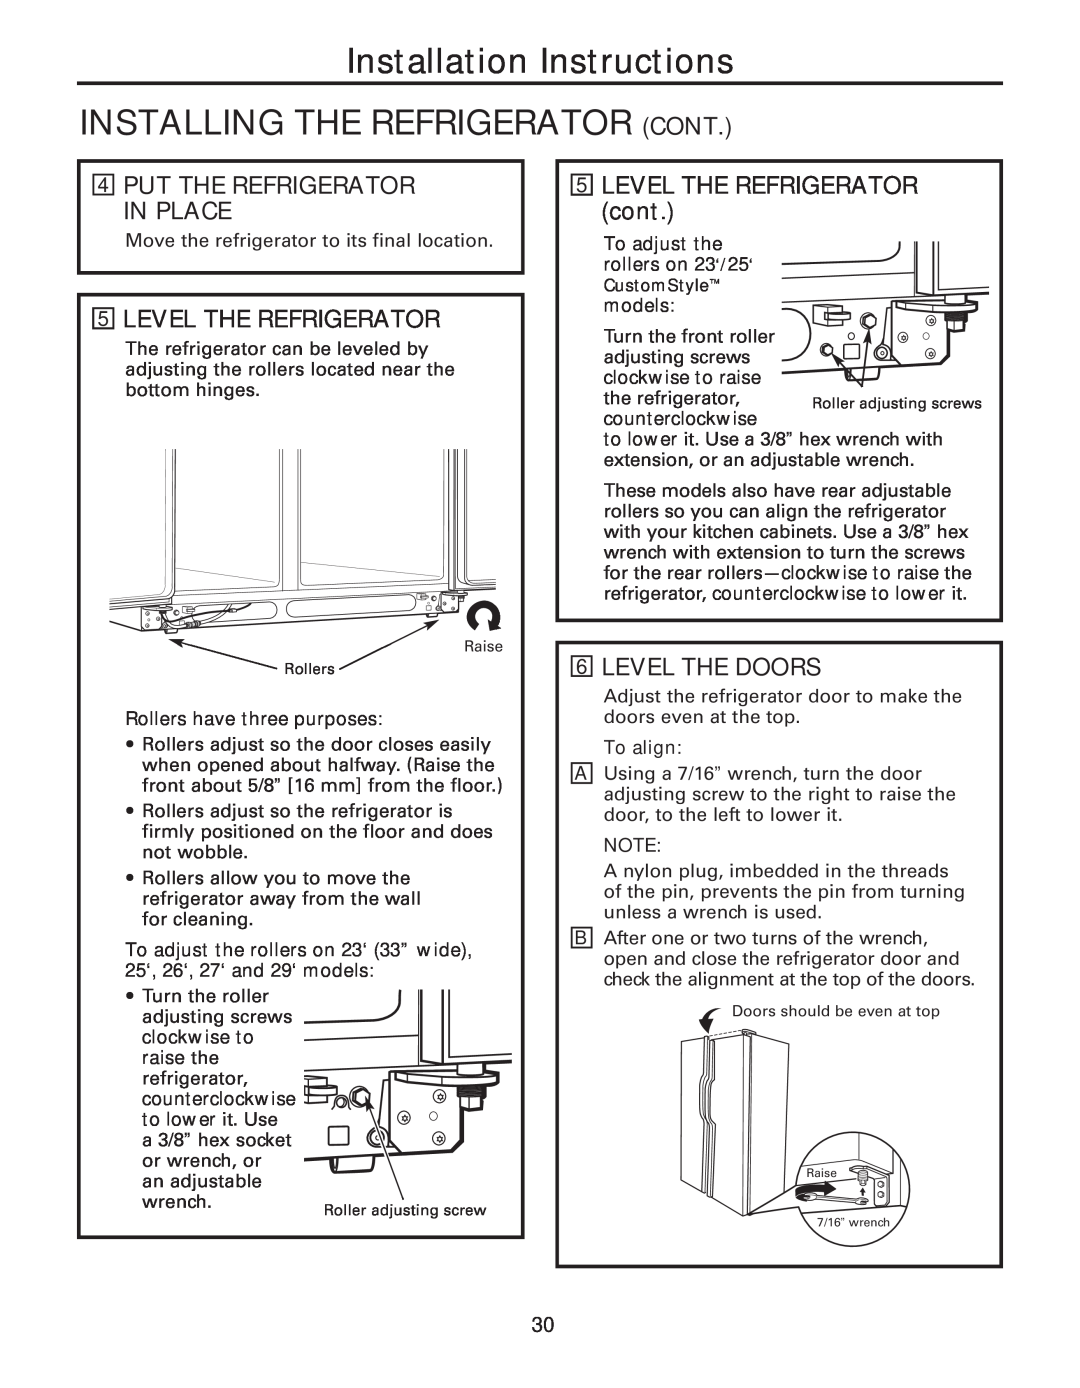 GE 49-60637 Installation Instructions INSTALLING THE REFRIGERATOR CONT, Level The Refrigerator, Level The Doors, To align 